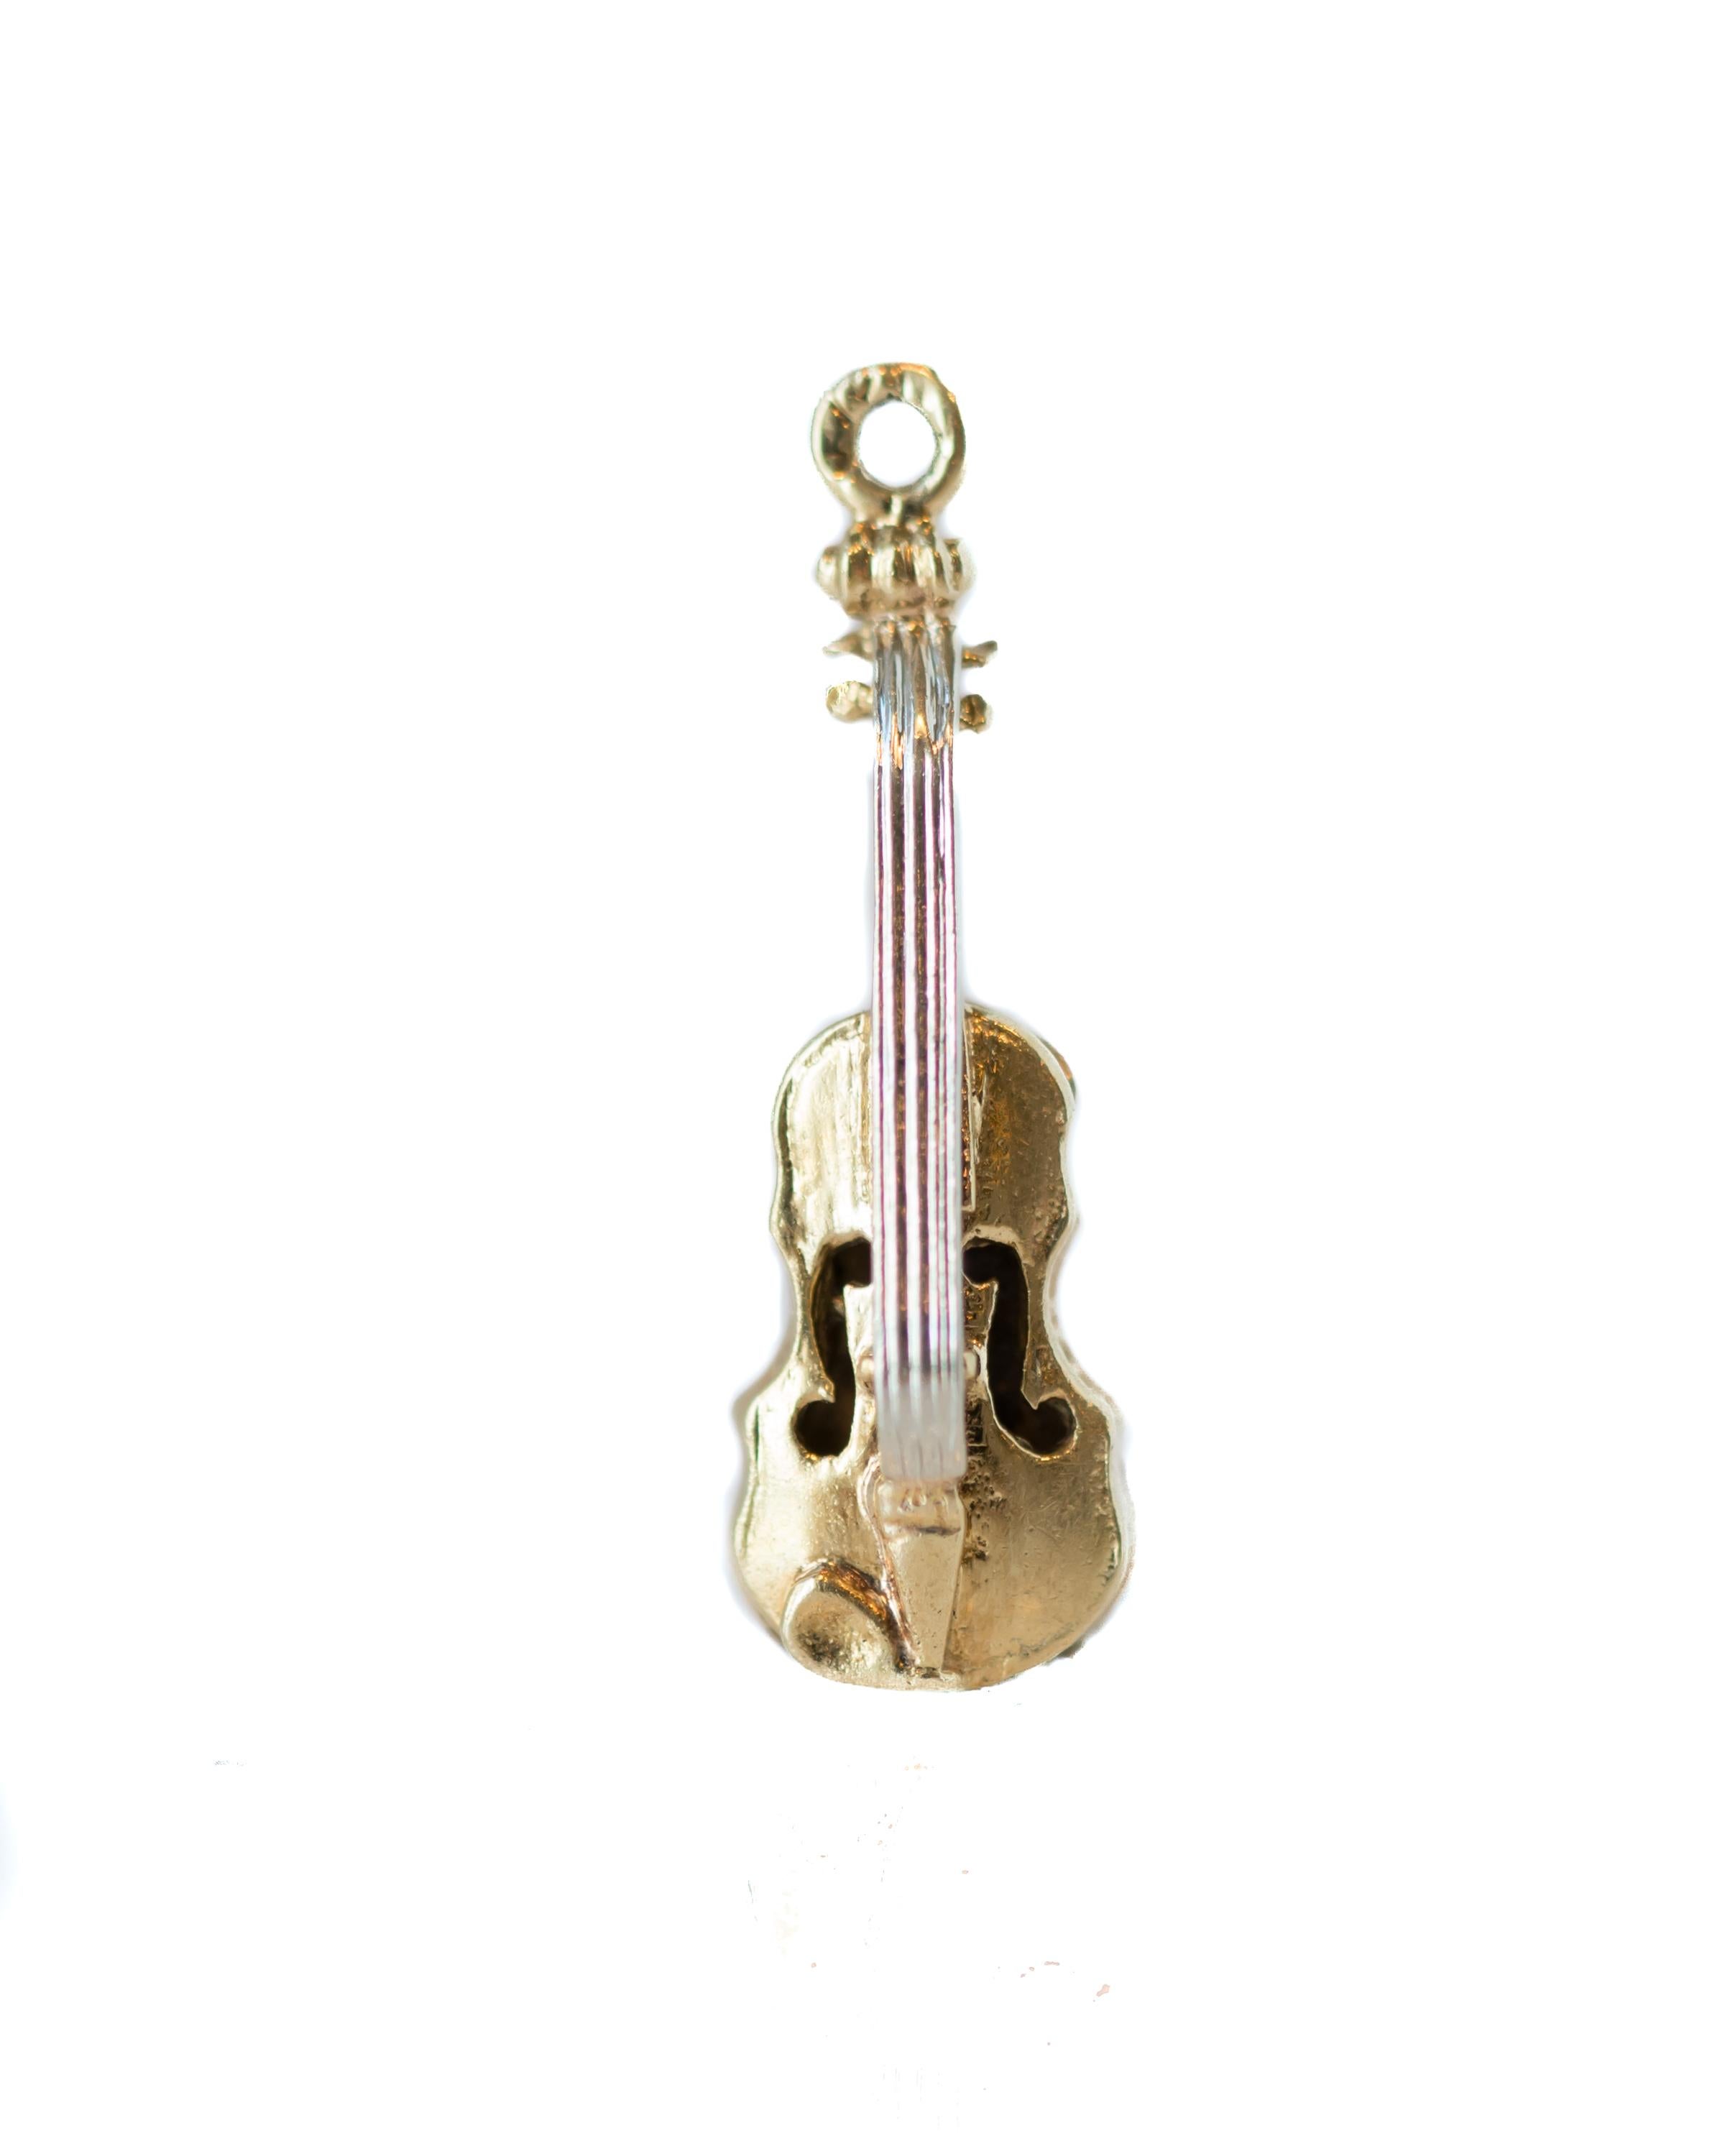 1950s Retro Violin, Viola Pendant or Charm in Shining 14k Yellow Gold

Features:
Tiny Stringed Violin 
Sleek, Detailed Design
High Polish 14k Yellow Gold
Sturdy Bail 
Measures 20 x 7 millimeters 

Charm Details:
Dimensions: 20 x 7 millimeters
Metal: